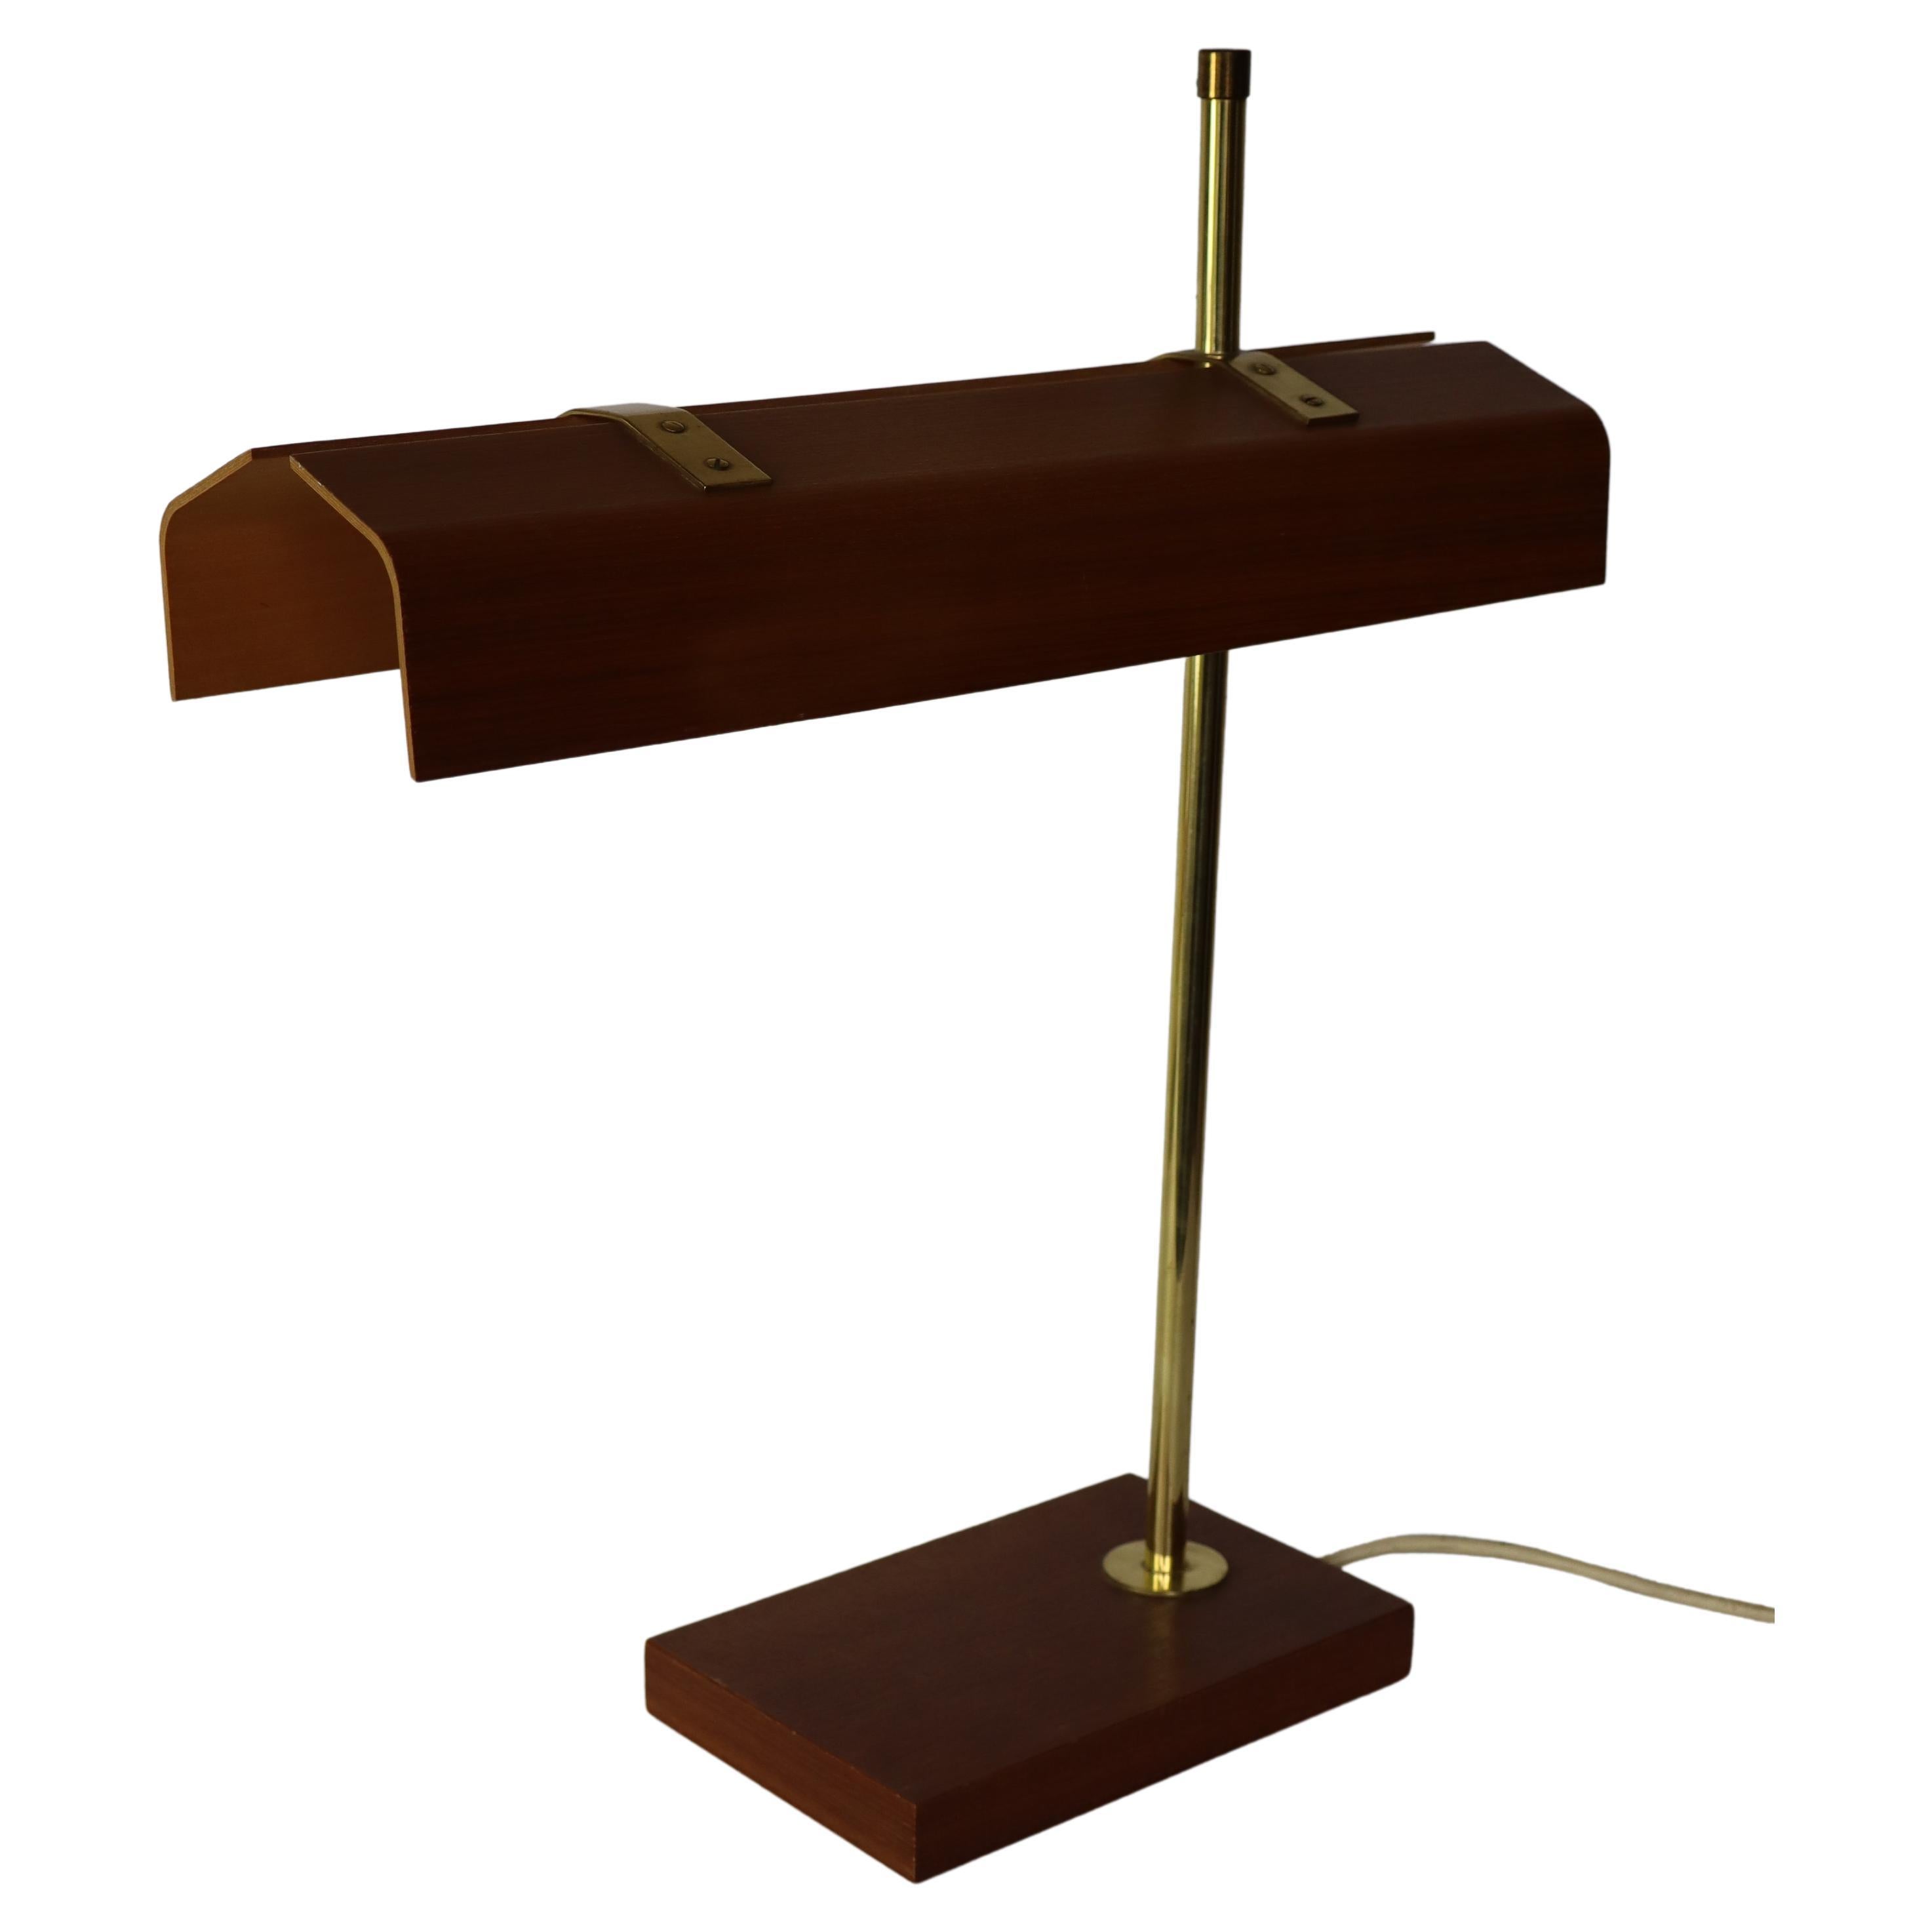 Midcentury plywood and brass table lamp